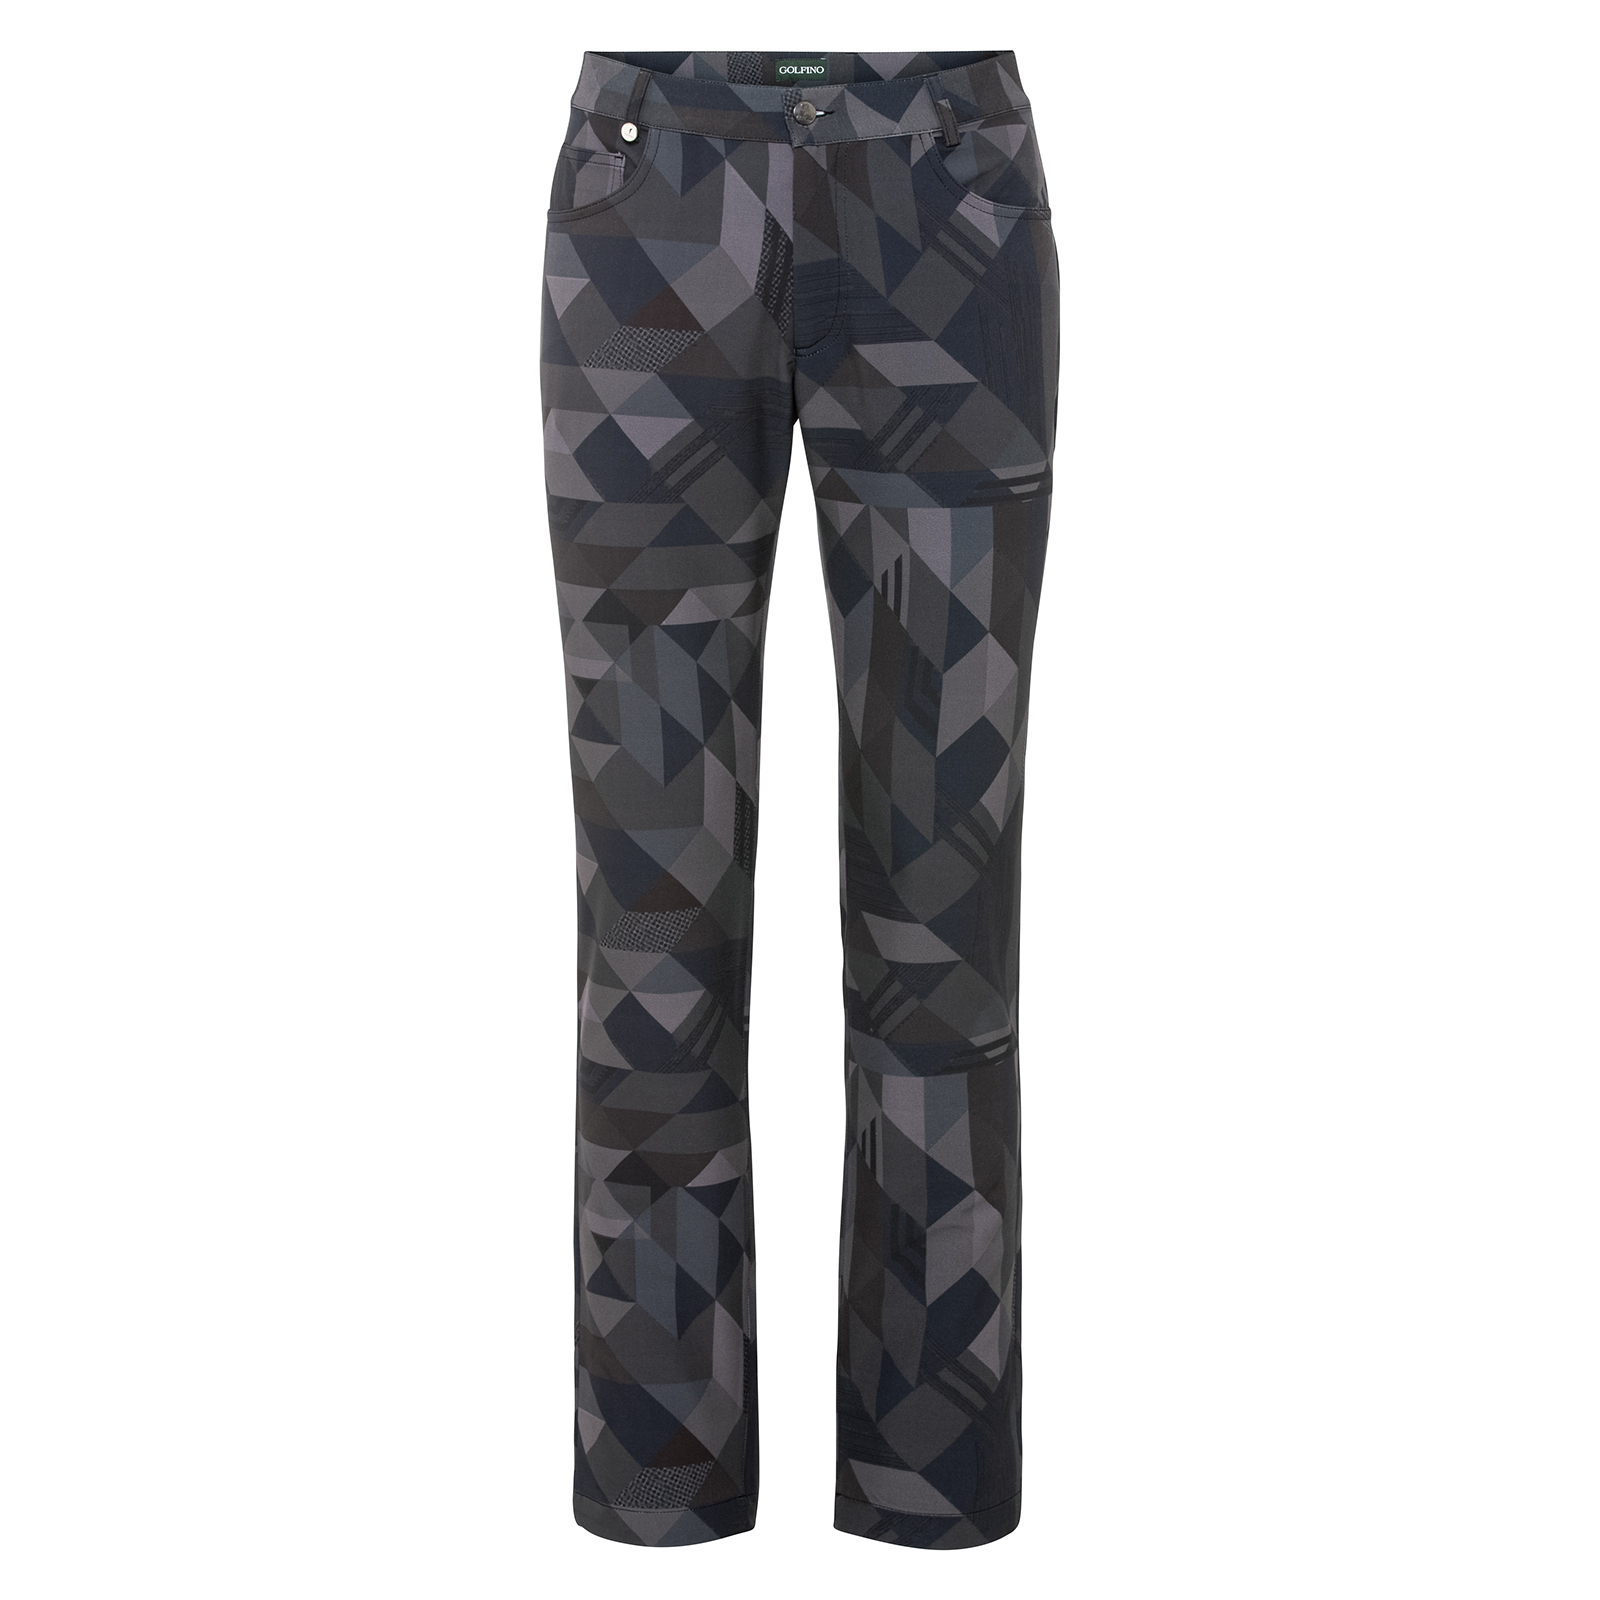 Extra slim fit men's golf trousers with graphic all-over print